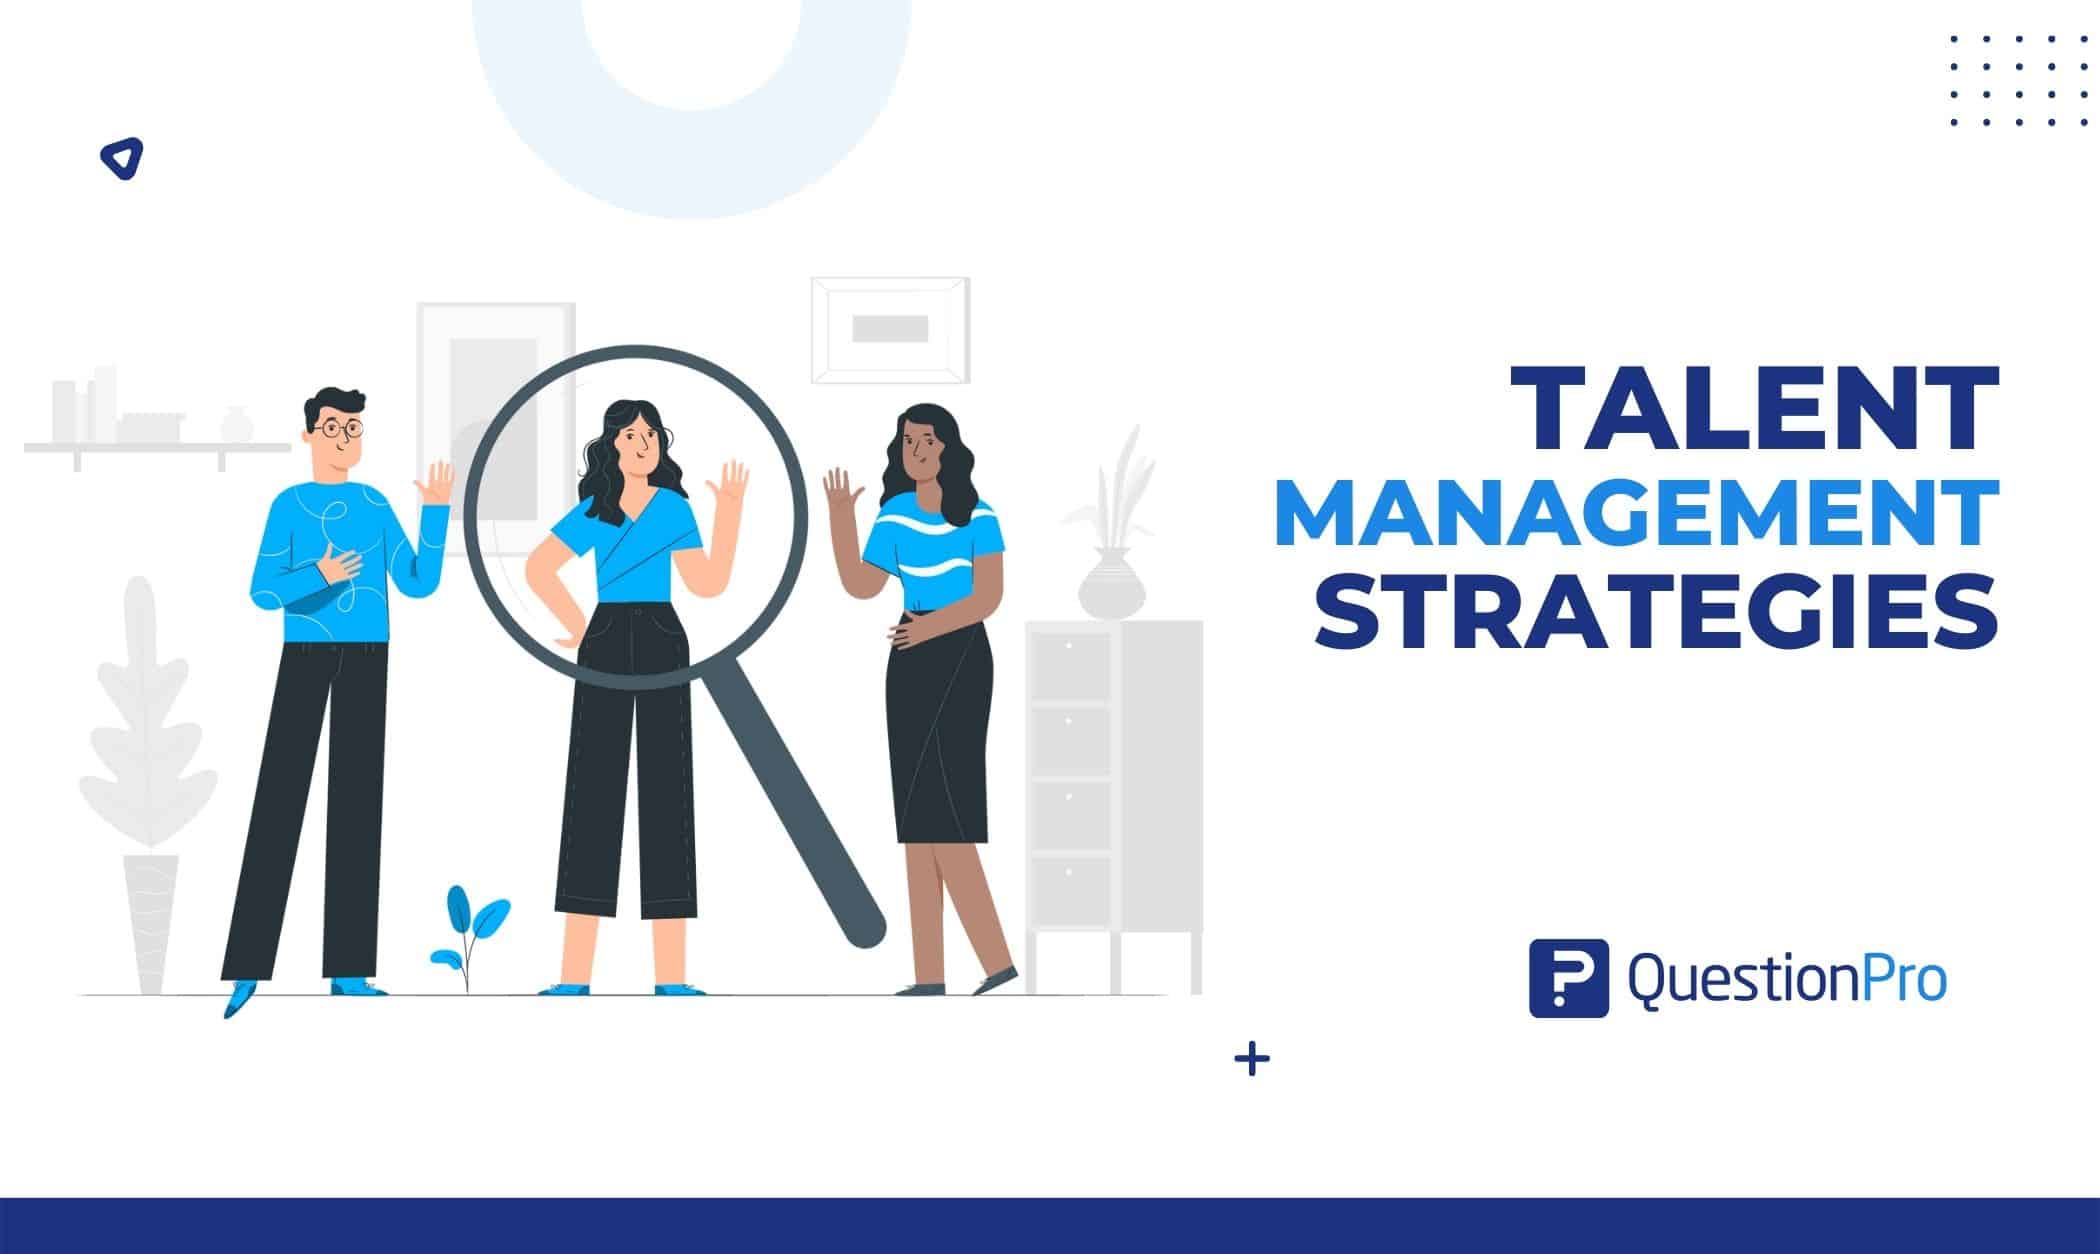 Talent management strategies help companies attract and develop talented employees. Identify employee skills and boosts their productivity. 